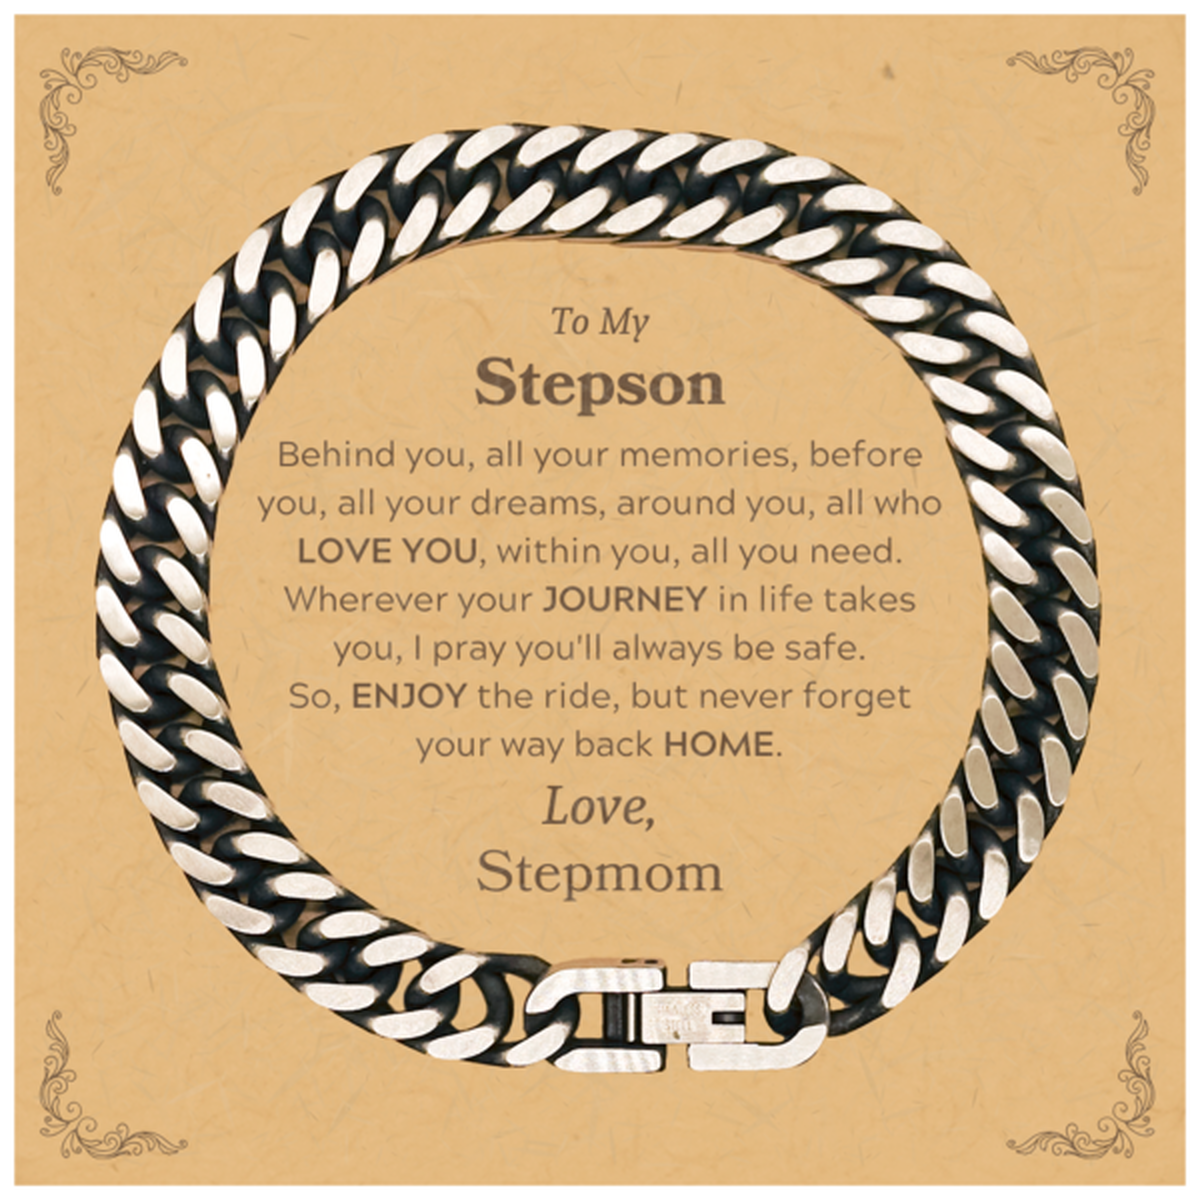 To My Stepson Graduation Gifts from Stepmom, Stepson Cuban Link Chain Bracelet Christmas Birthday Gifts for Stepson Behind you, all your memories, before you, all your dreams. Love, Stepmom